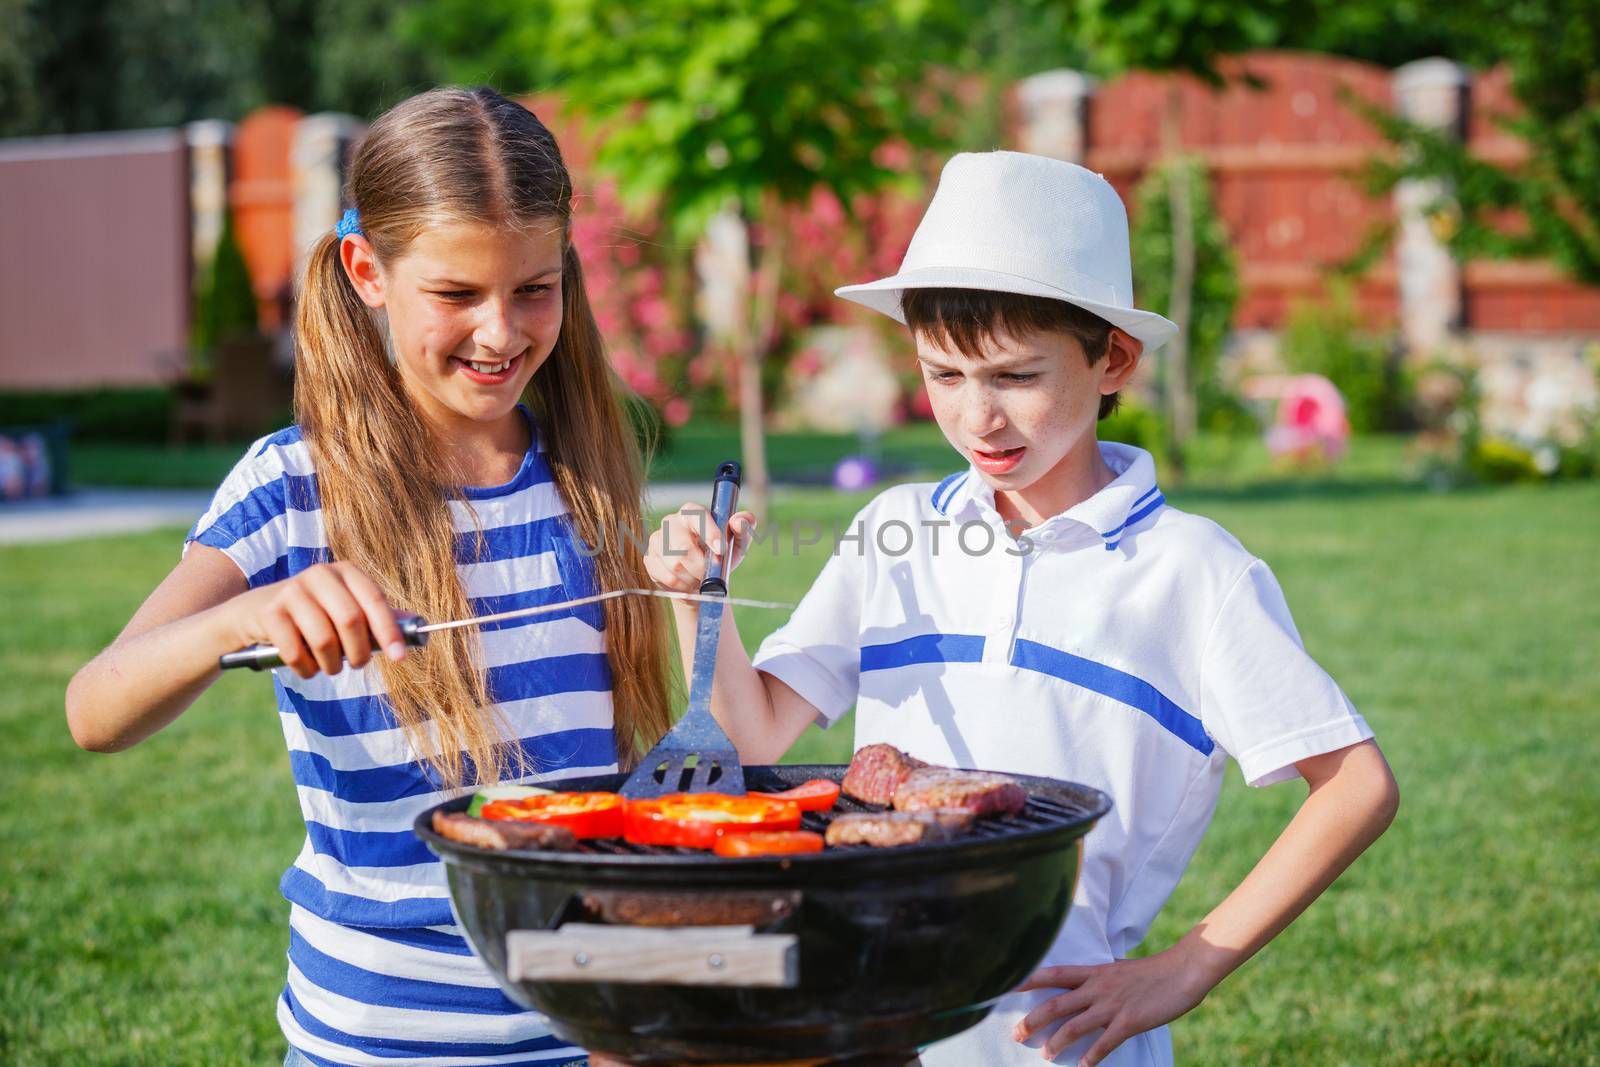 Happy kids preparing meat and vegetables using a barbecue grill